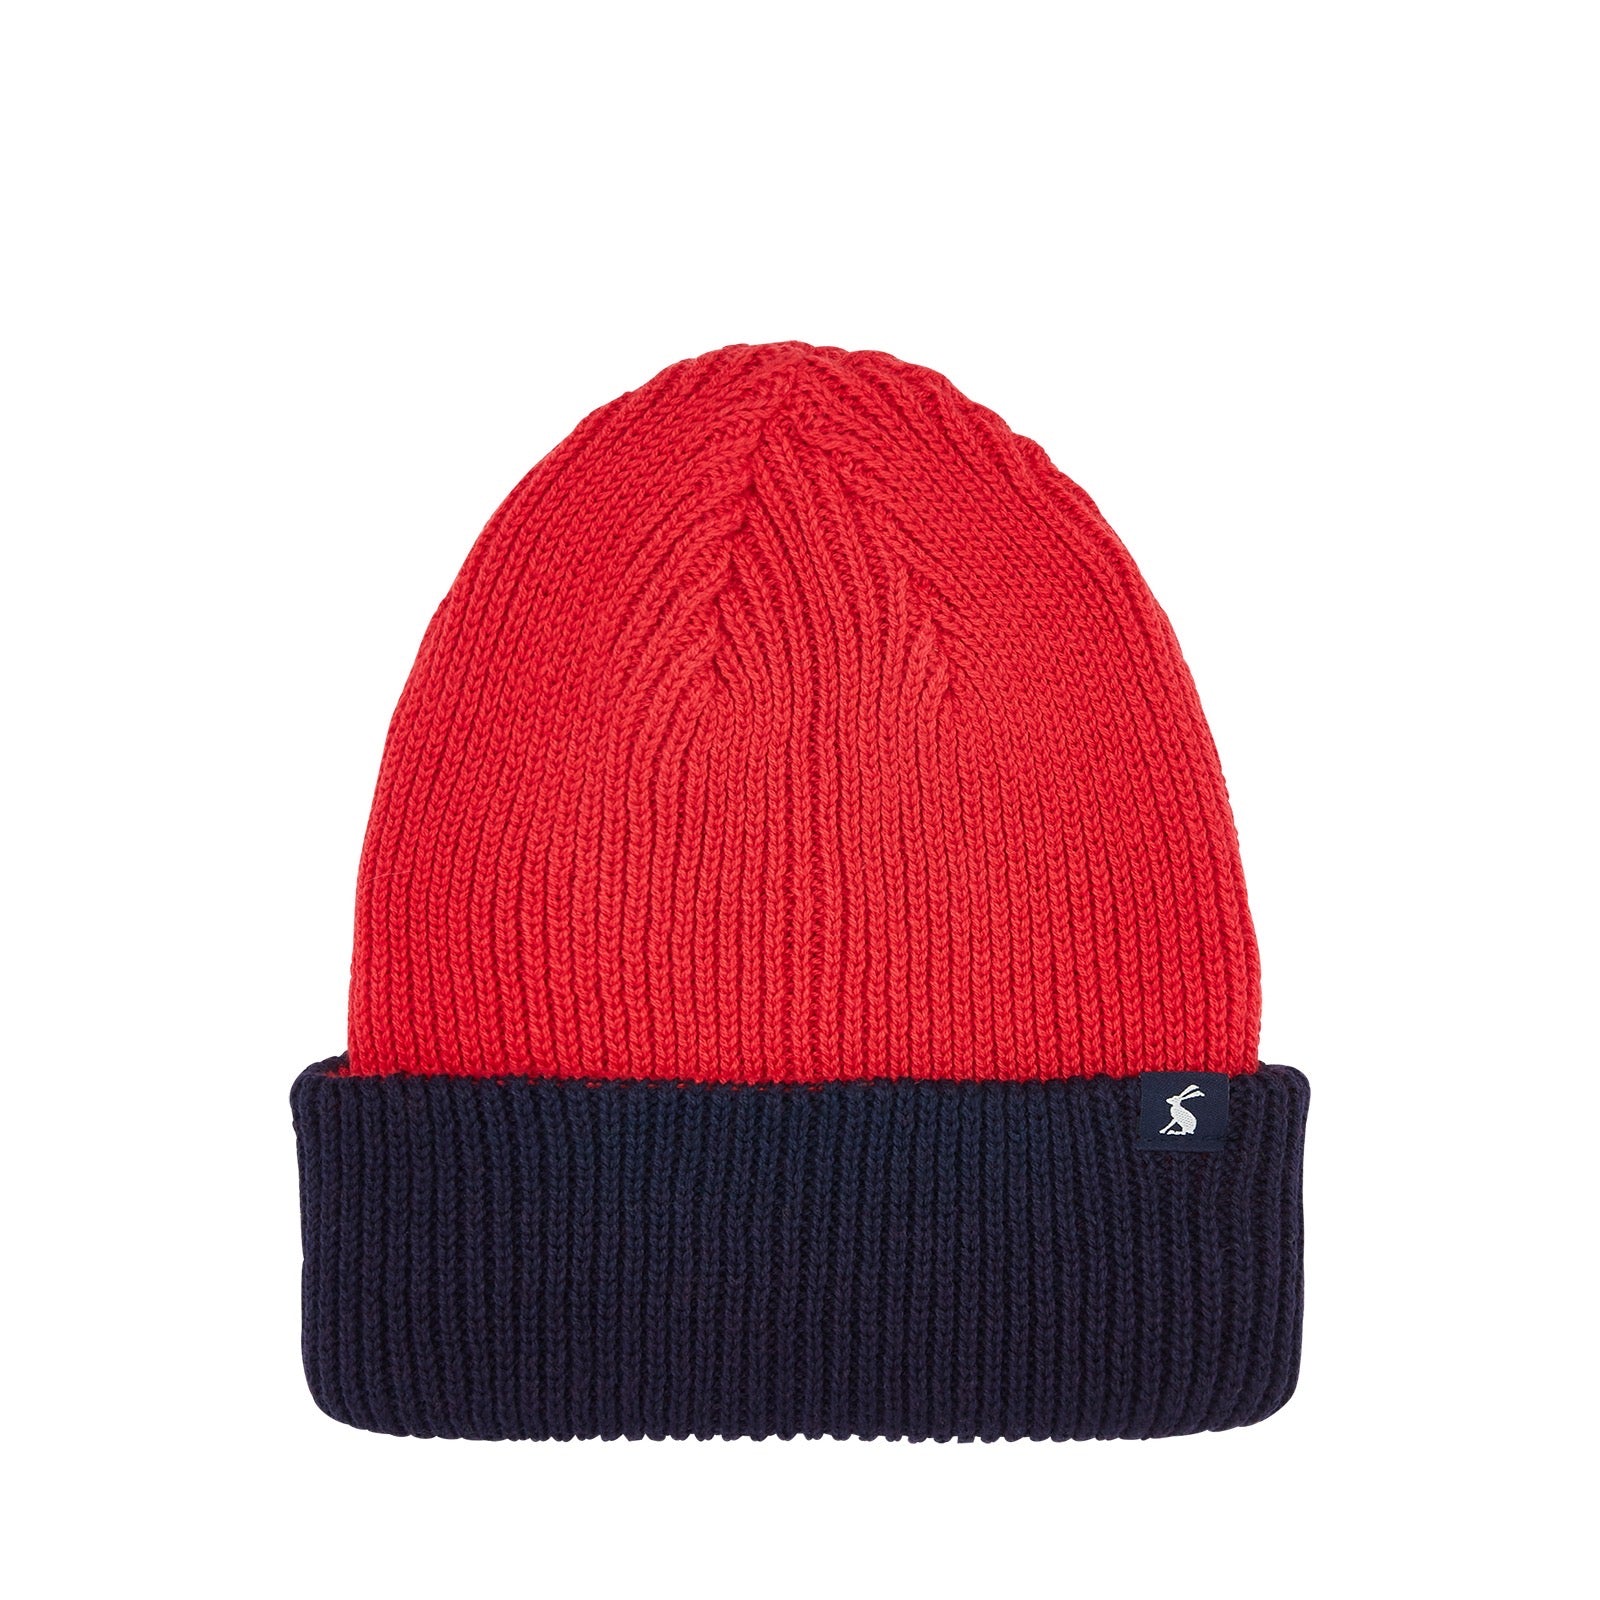 Joules Hedley Reversible Hat 218367 Clothing 3-7YRS / Red,8-12YRS / Red